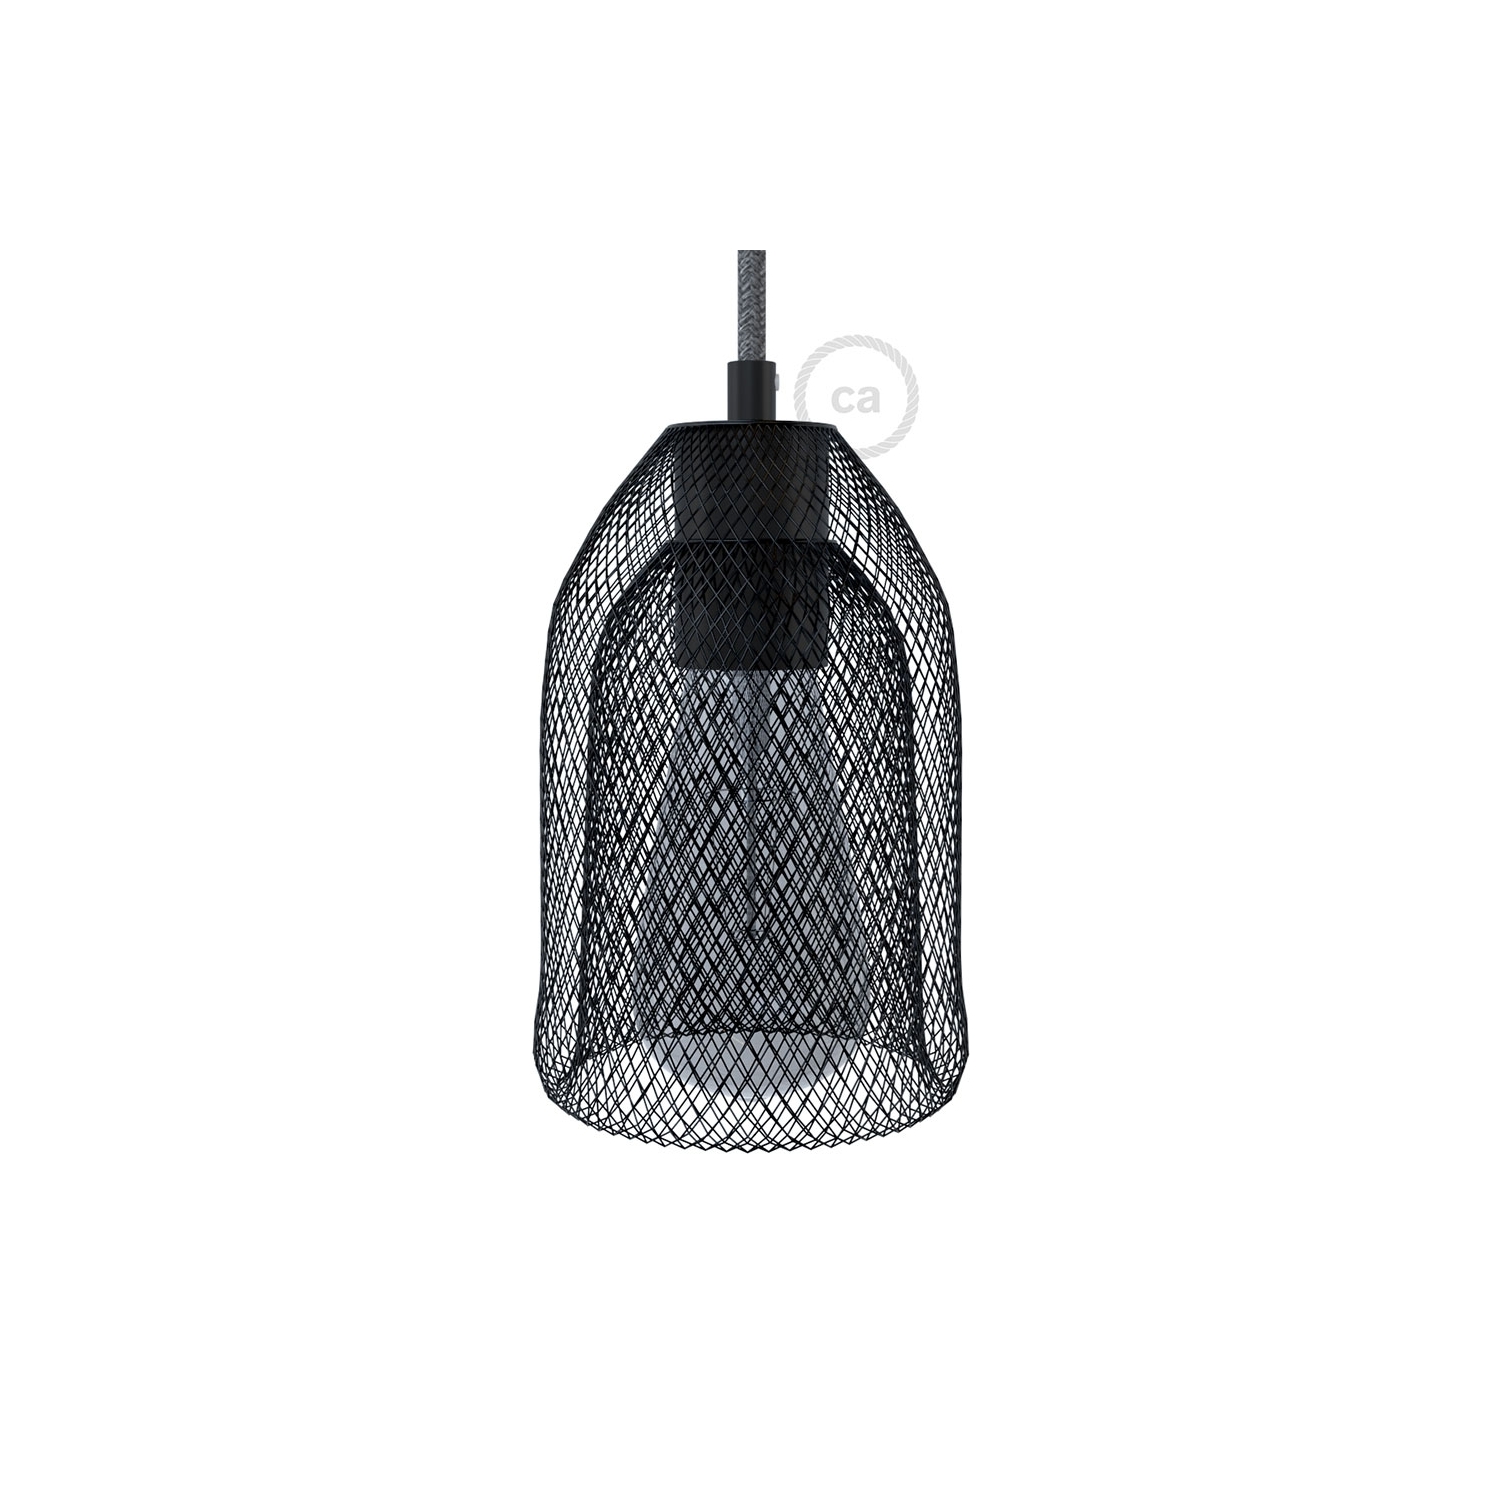 Ghostbell - The wire mesh pendant lampshade with socket cover